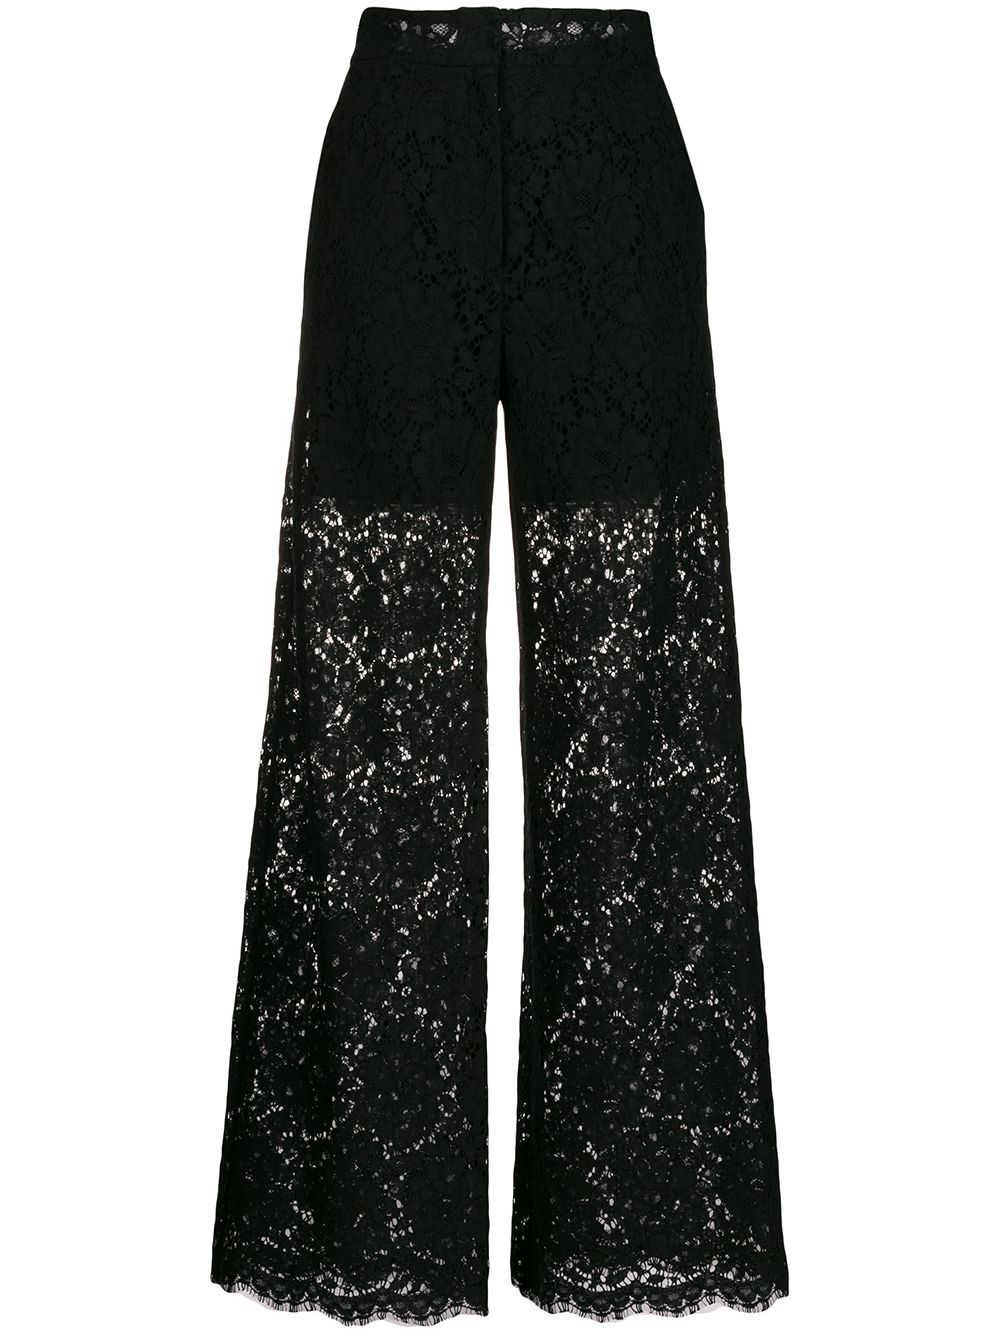 DOLCE & GABBANA FLORAL LACE PATTERN TROUSERS